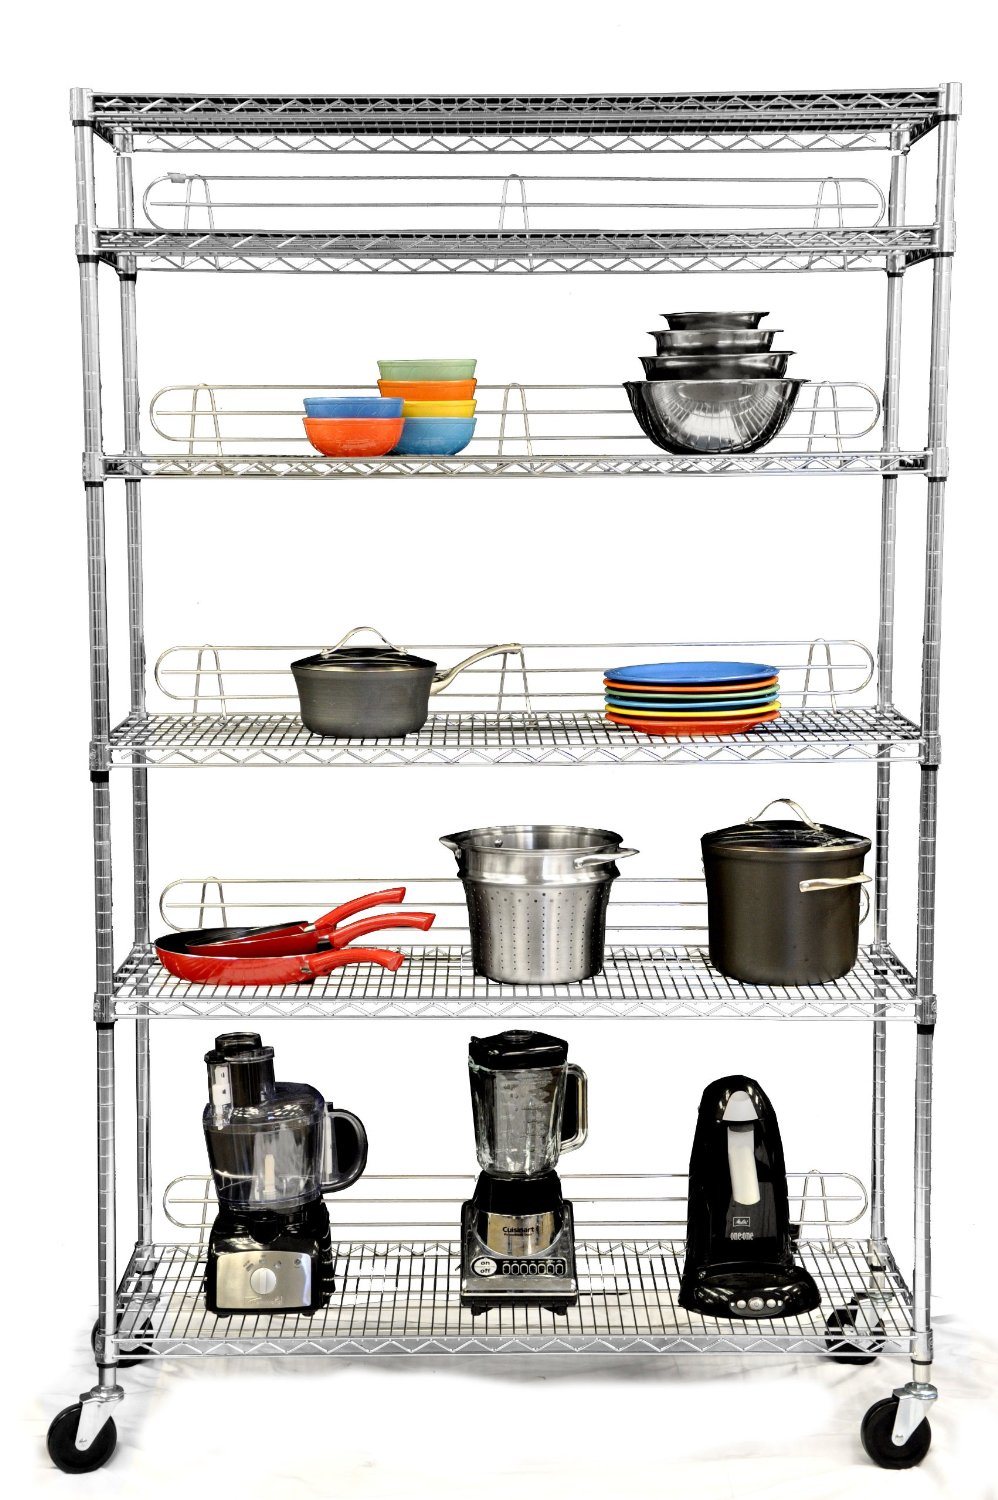 /proimages/2f0j00CevTMzQKnyUB/industrial-metal-storage-wire-shelving-with-casters.jpg